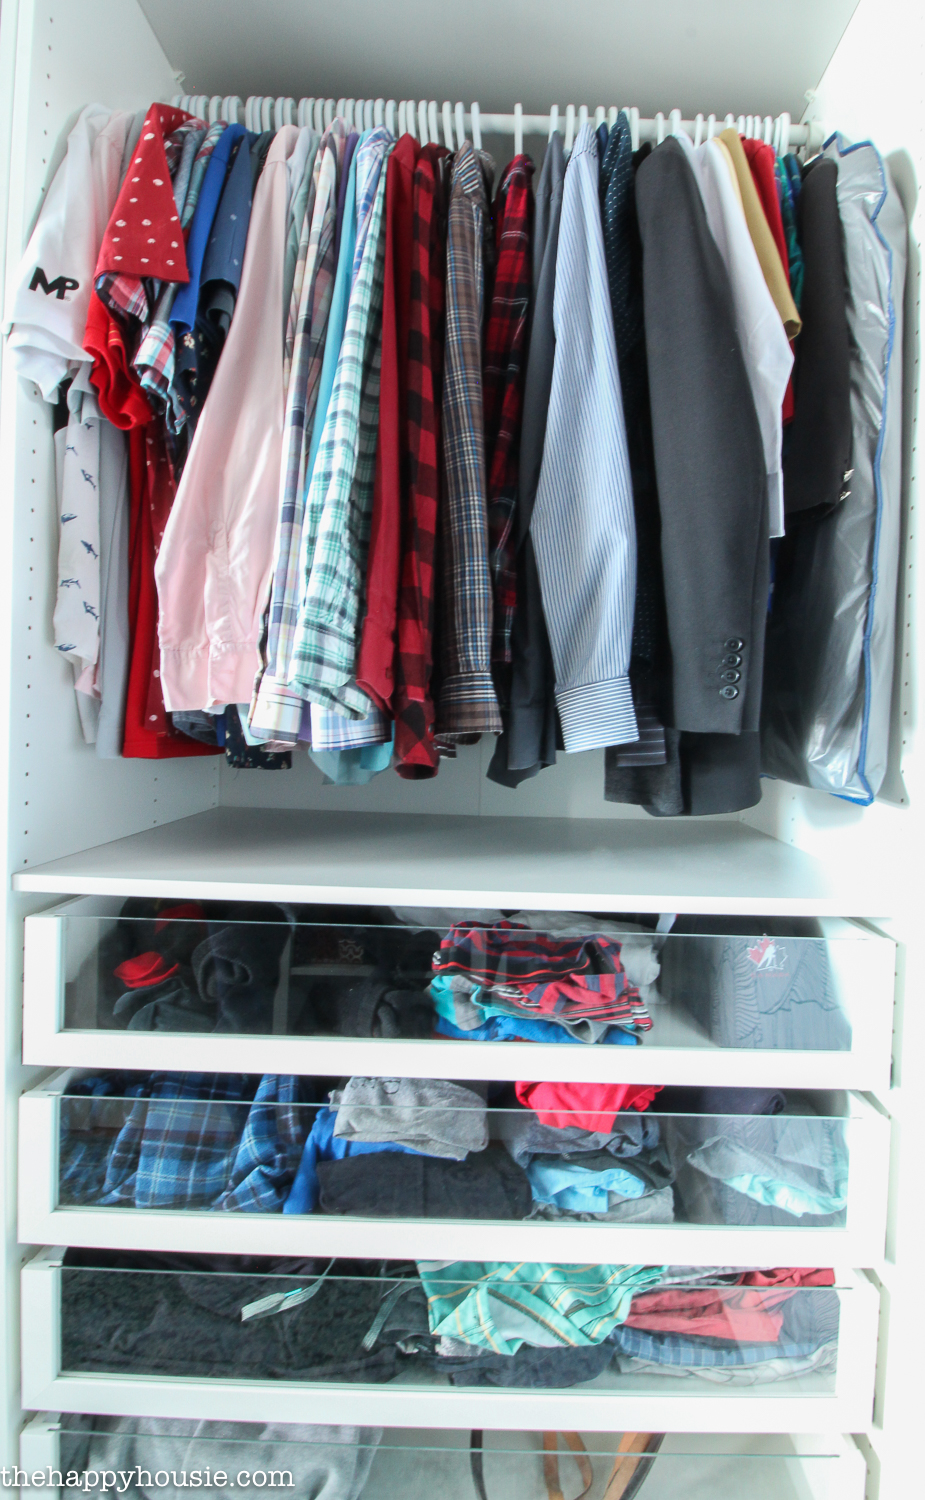 https://www.thehappyhousie.com/wp-content/uploads/2017/02/How-to-Purge-Clothing-and-Organize-Your-Closet-22.jpg